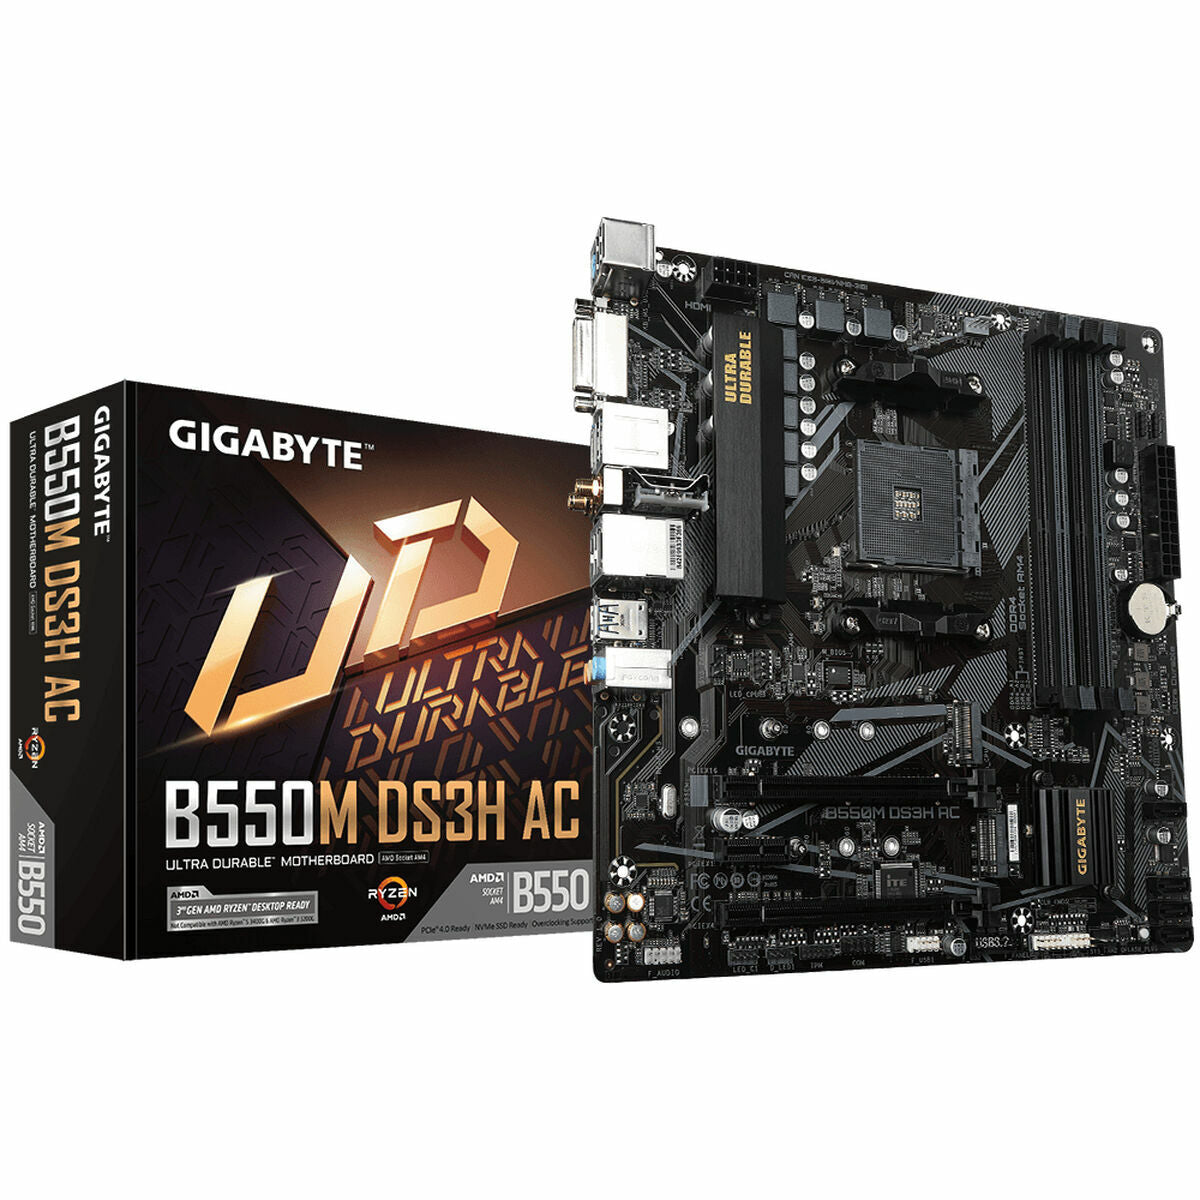 Motherboard Gigabyte B550M DS3H AMD B550 AMD AMD AM4, Gigabyte, Computing, Components, motherboard-gigabyte-b550m-ds3h-amd-b550-amd-amd-am4, Brand_Gigabyte, category-reference-2609, category-reference-2803, category-reference-2804, category-reference-t-19685, category-reference-t-19912, category-reference-t-21360, category-reference-t-25660, computers / components, Condition_NEW, Price_100 - 200, Teleworking, RiotNook